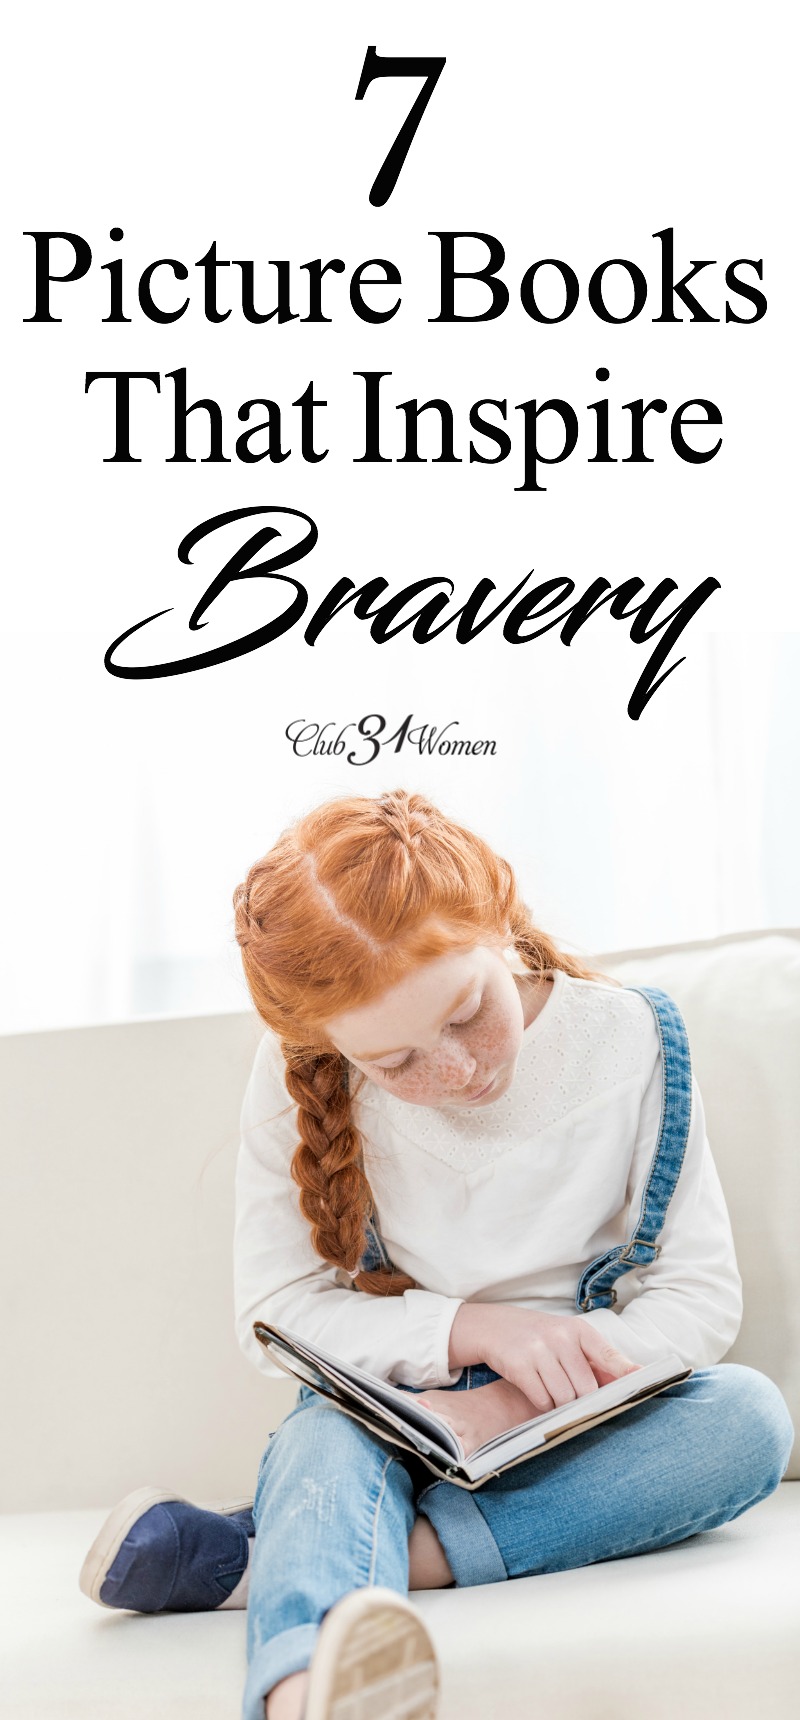 Bravery doesn't always come naturally. Sometimes our children need a little inspiration to point them in the right direction. via @Club31Women